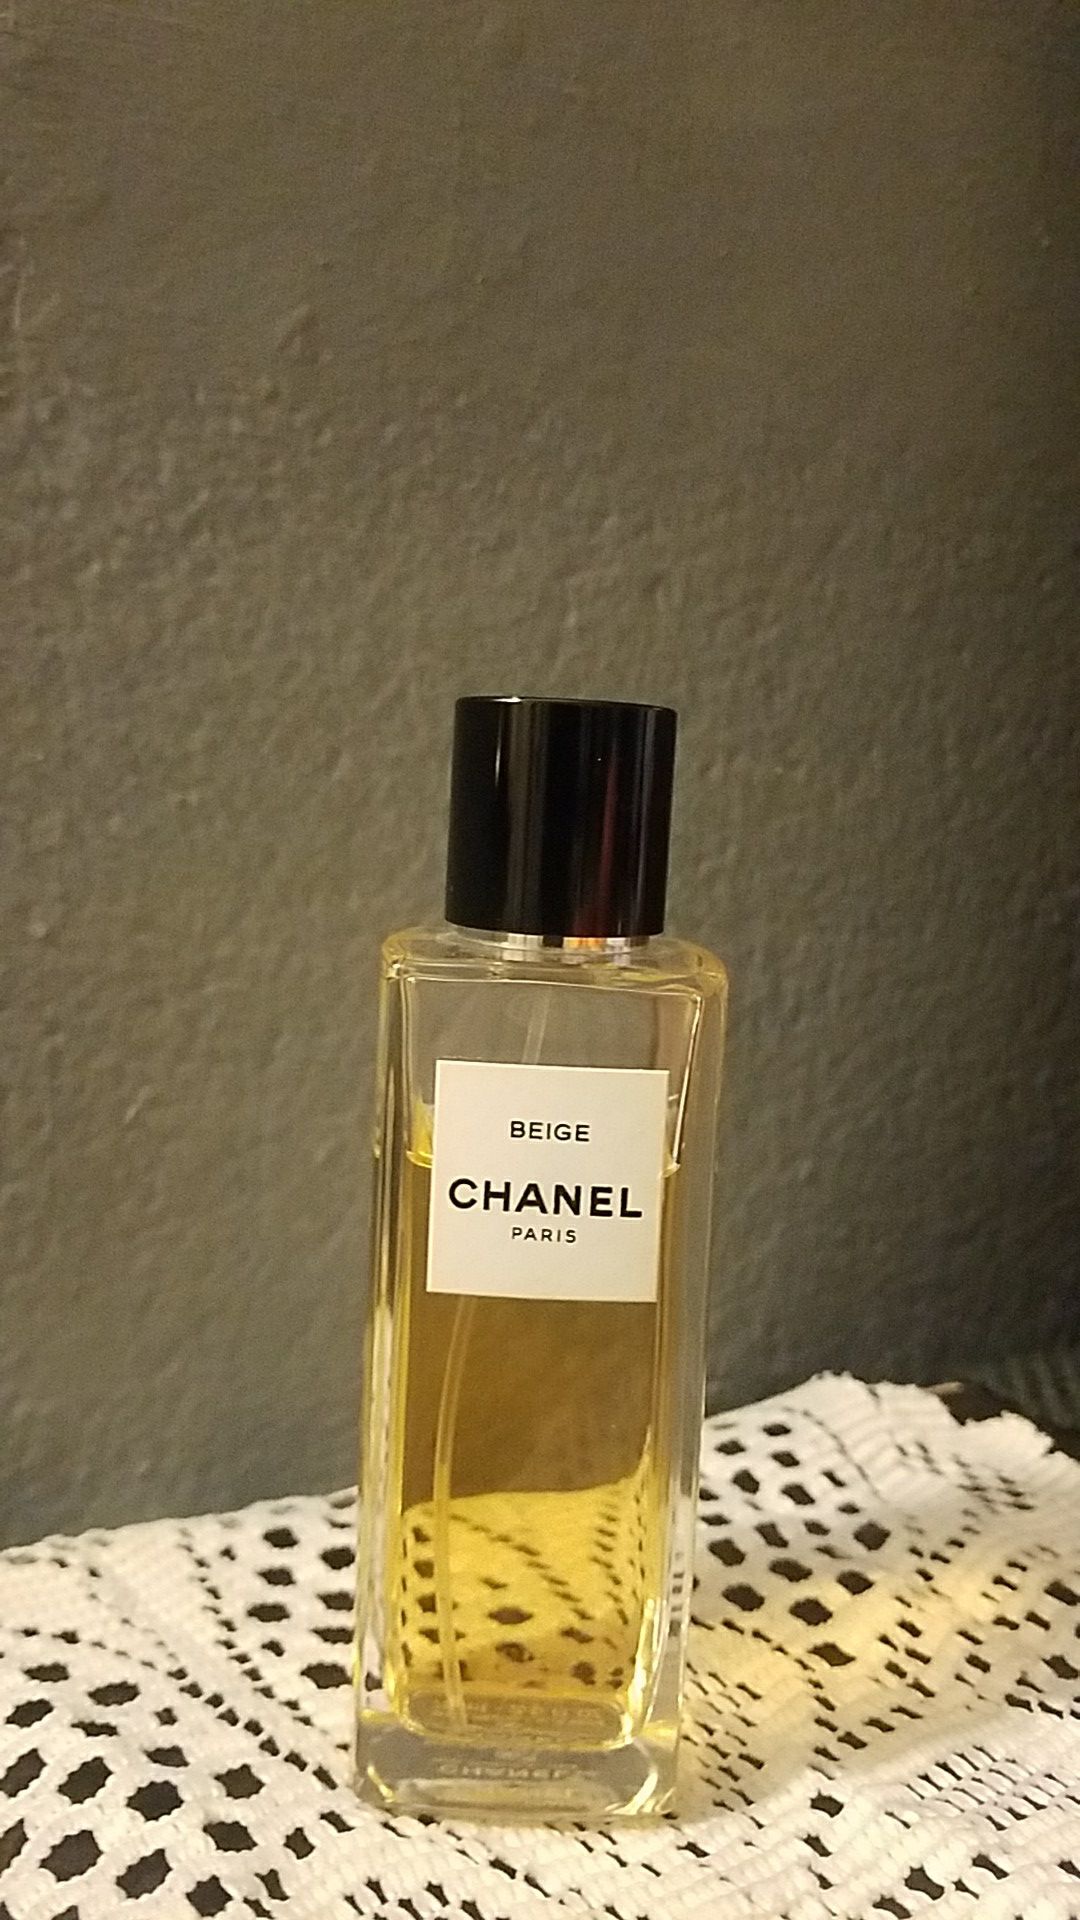 Beige CHANEL Paris Made In France Perfume!!